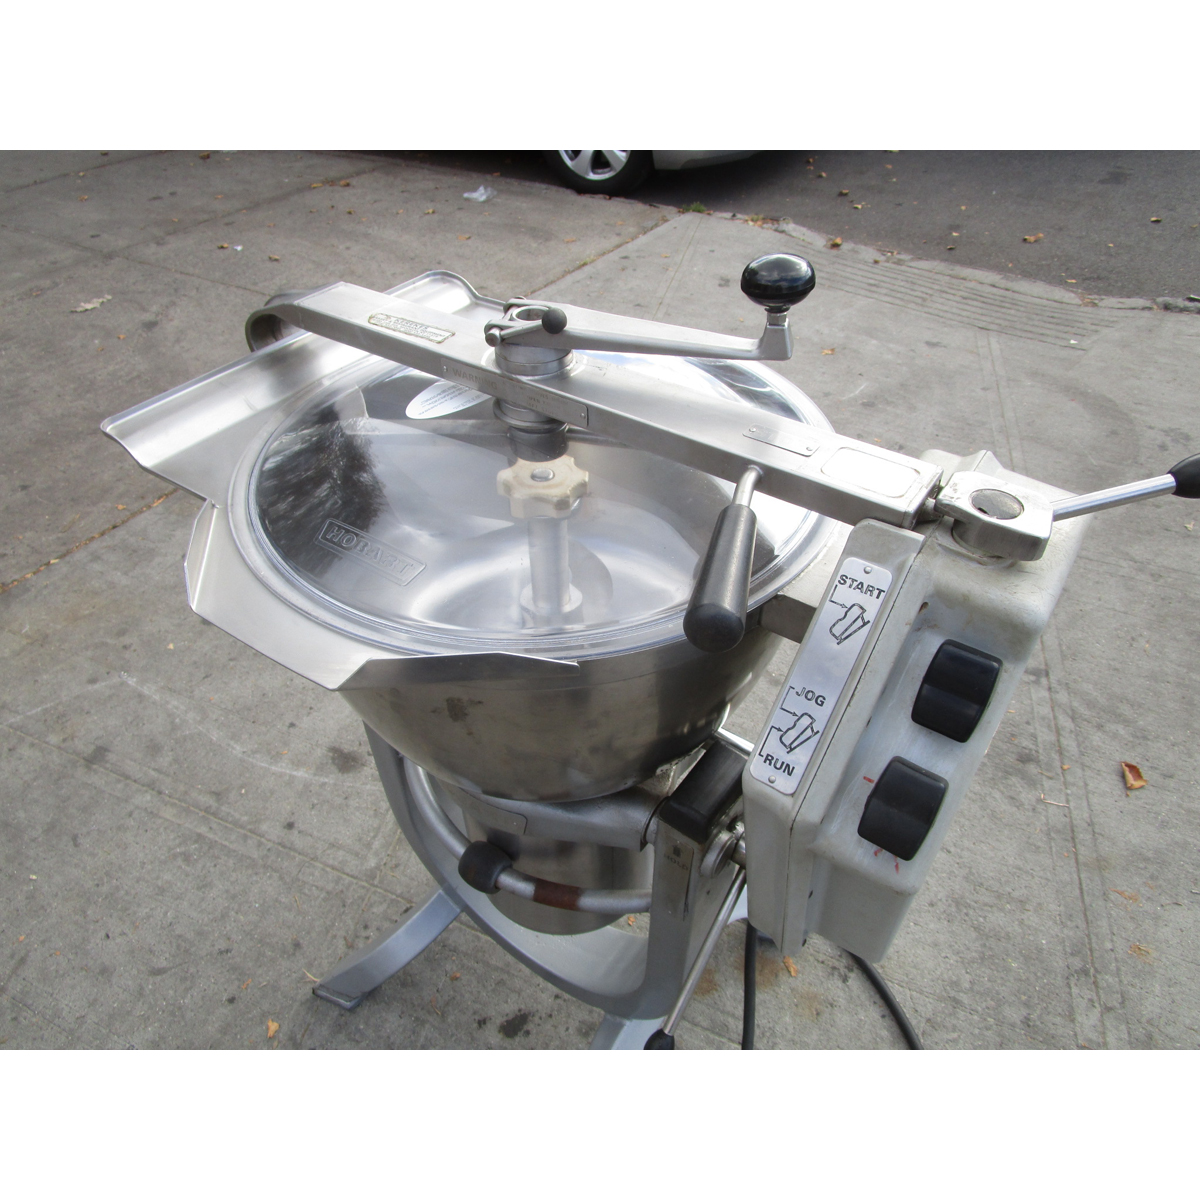 Hobart HCM-450 Vertical Cutter Mixer 45 Quart, Used Great Condition image 2